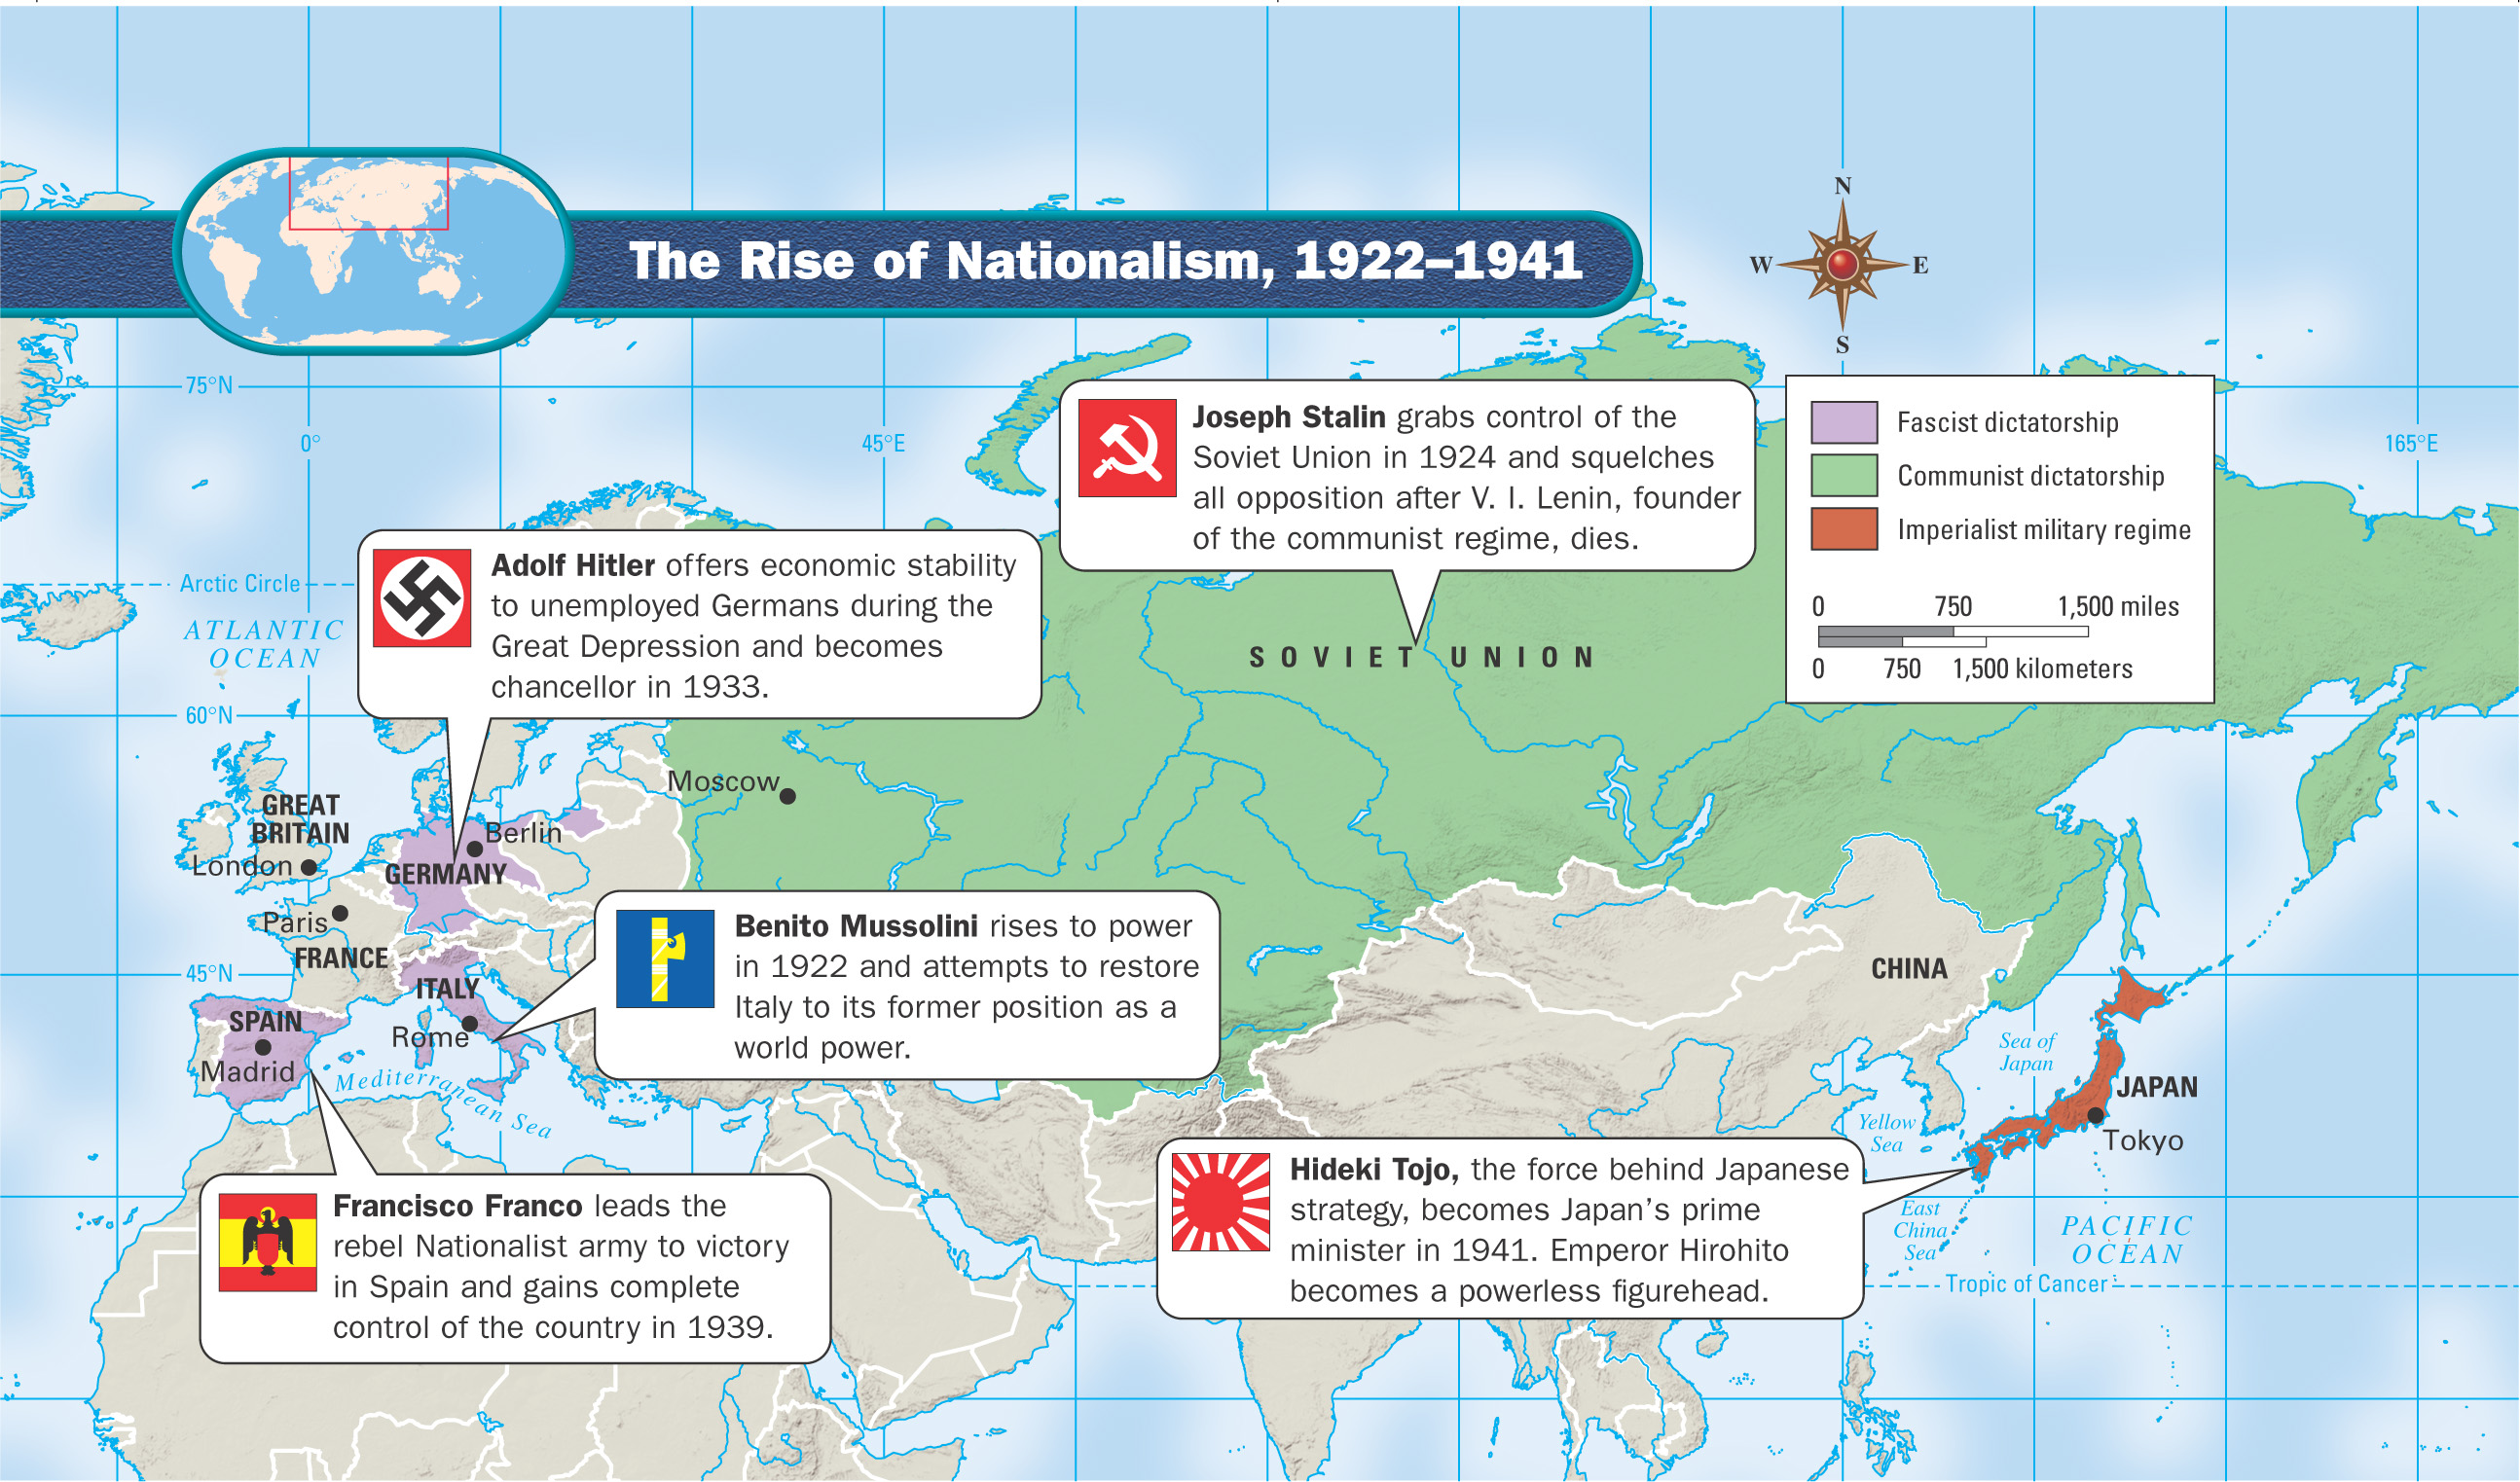 Map: The Rise of Nationalism 1922 - 1941.  Colored areas with labels show Communist dictatorship in the Soviet Union, Fascist dictatorships in Germany, Italy, and Spain, and Imperialist military regime in Japan.